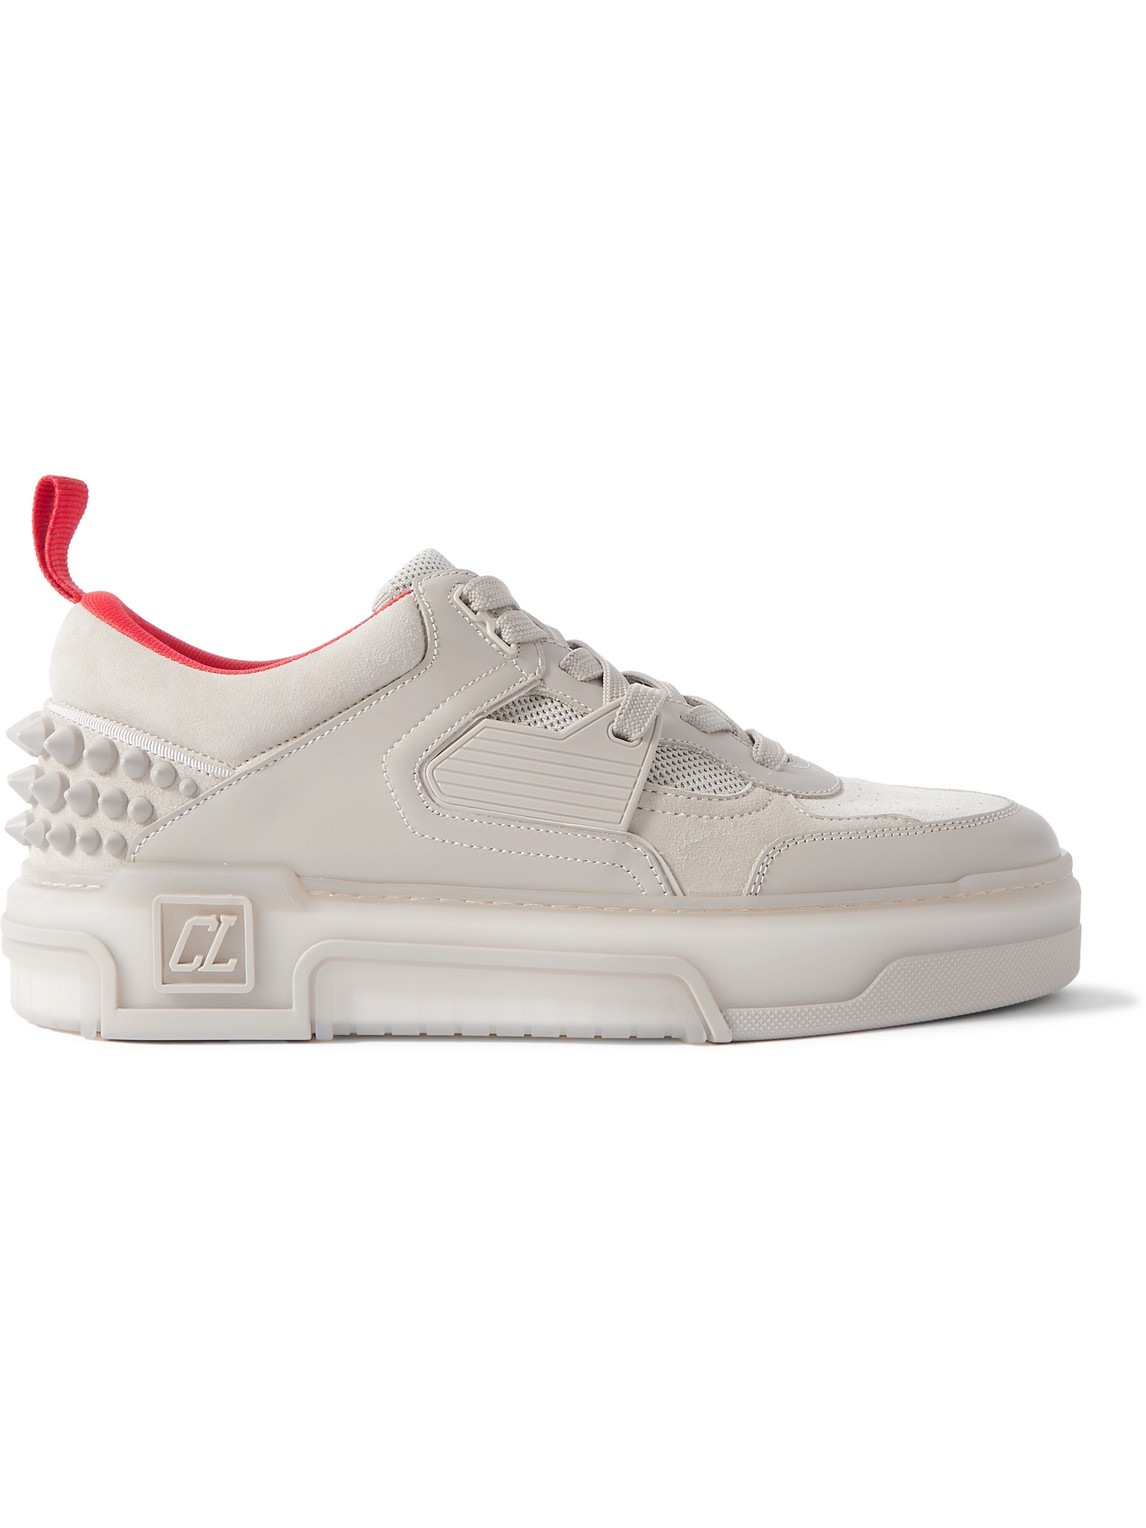 Christian Louboutin Astroloubi Spiked Leather, Suede And Mesh Trainers In Neutrals